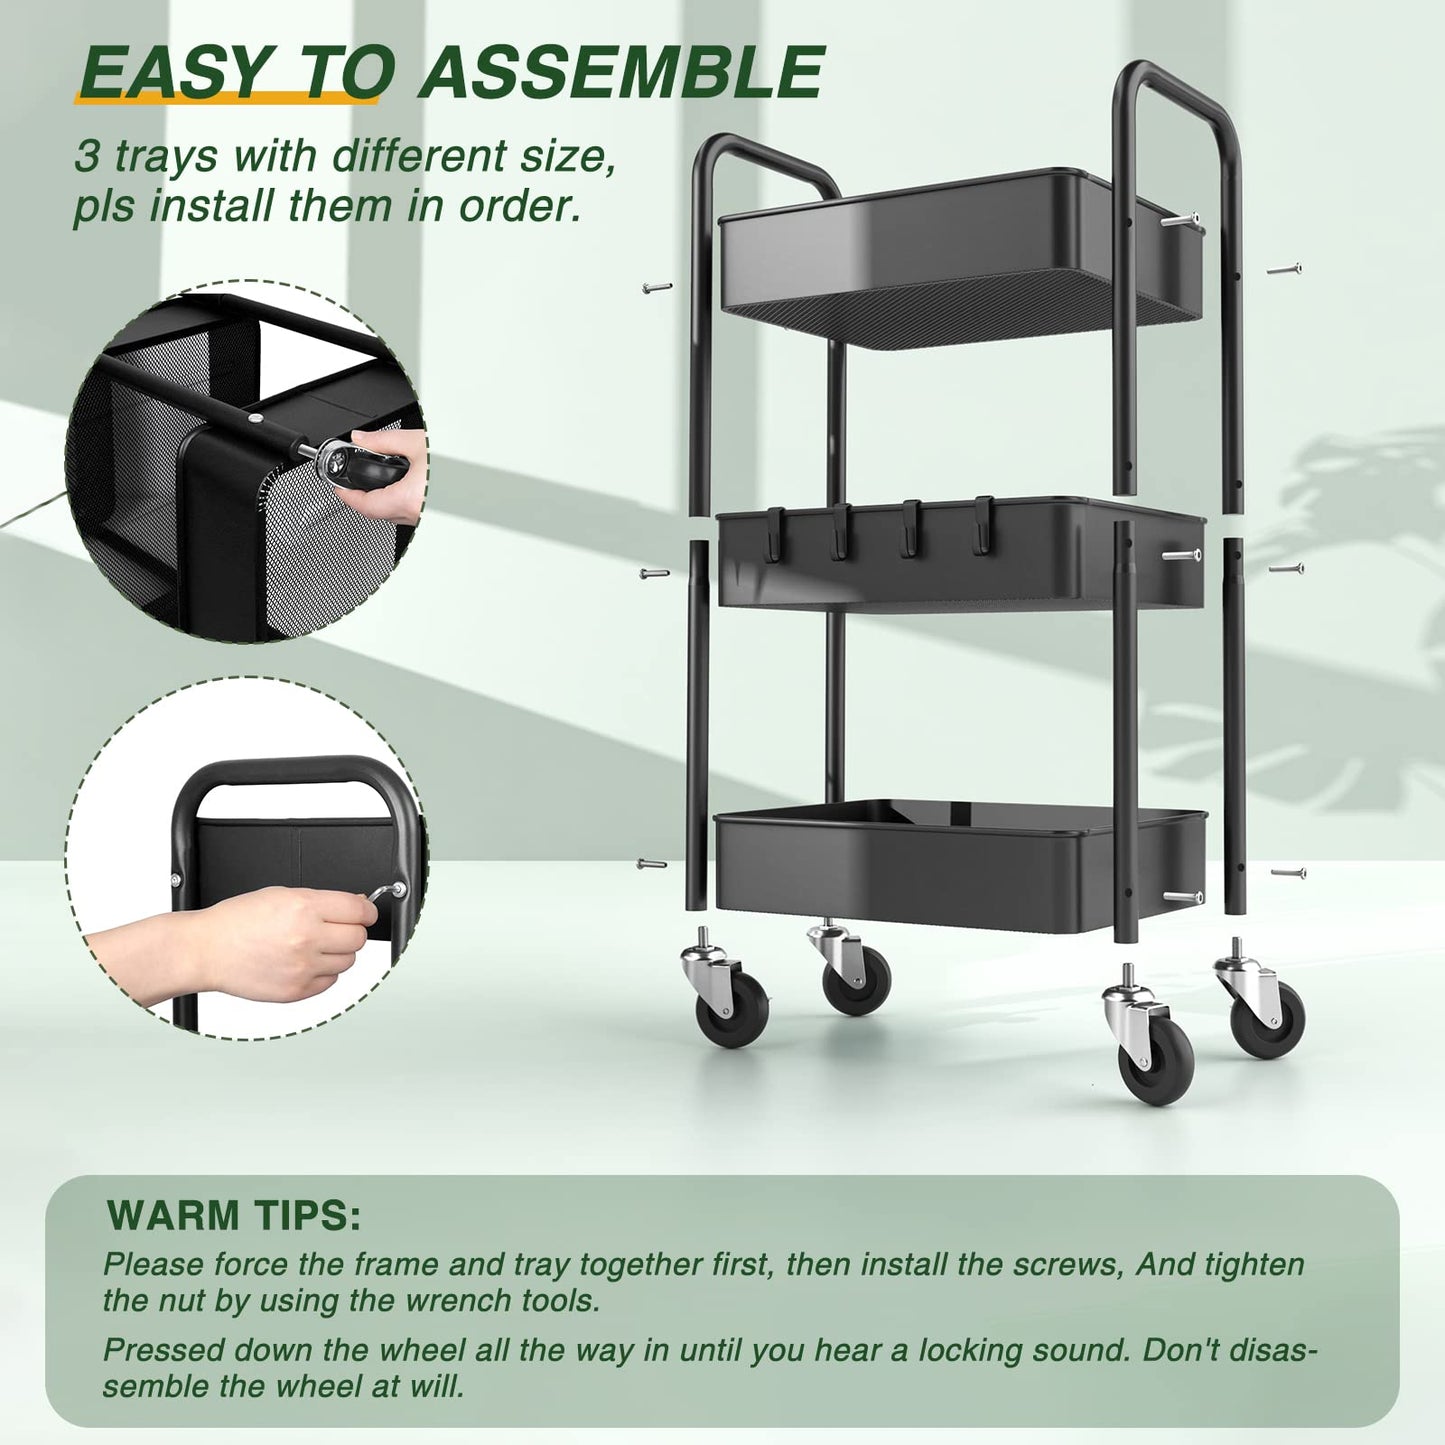 LEHOM 3 Tier Rolling Utility Cart, Metal Trolley Cart with Wheels, Hooks, Easy Assembly Organizer Storage Cart for Bathroom, Kitchen, Office,